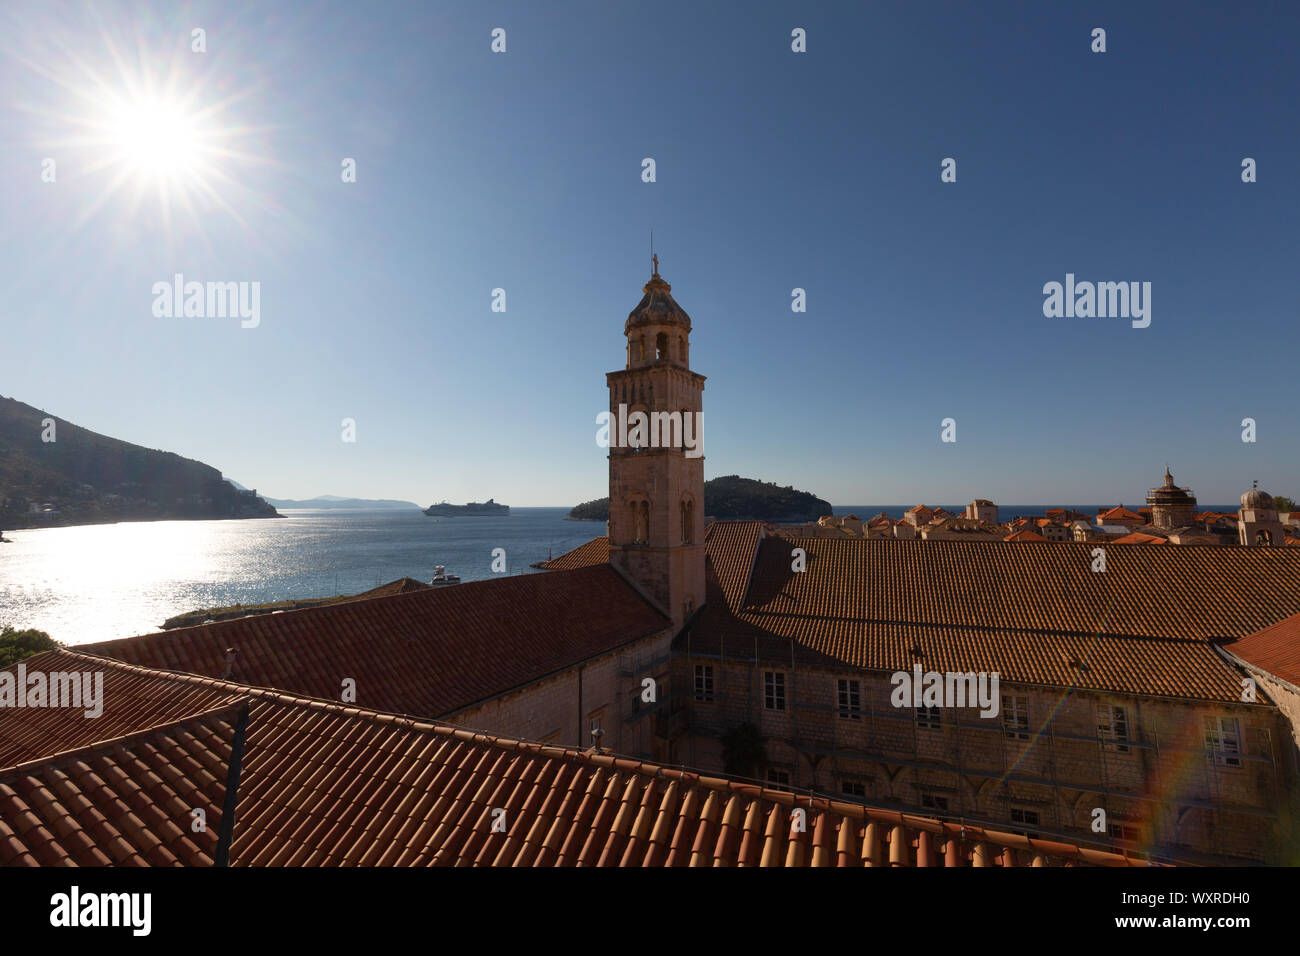 Dubrovnik old town; the belltower of the Domican Monastery and the morning summer sun seen from the city wall, Dubrovnik Croatia Europe Stock Photo